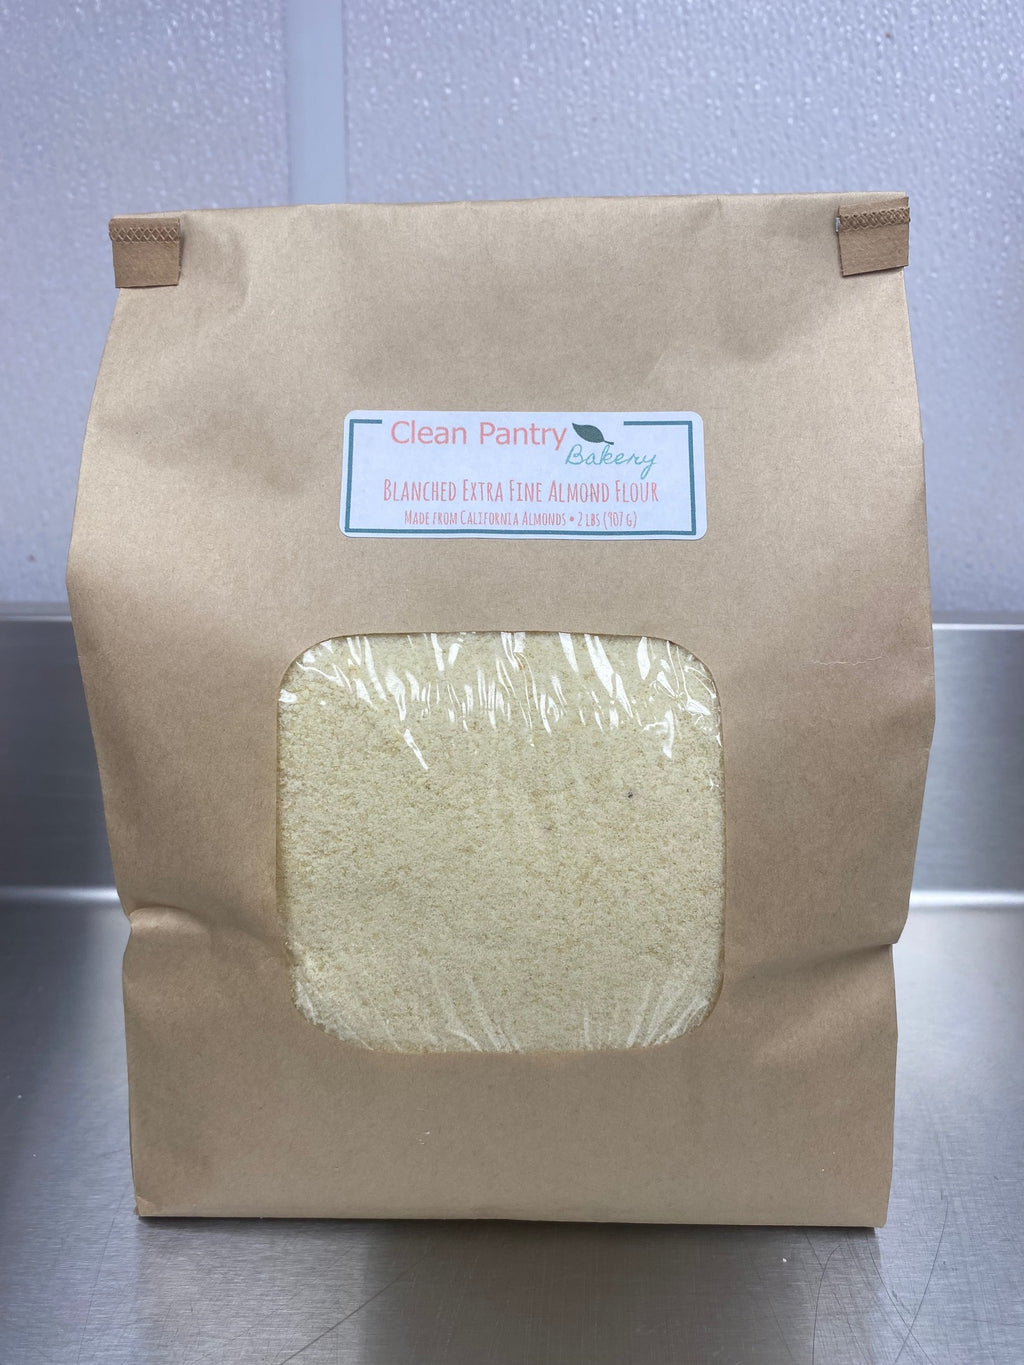 Blanched Extra Fine Almond Flour